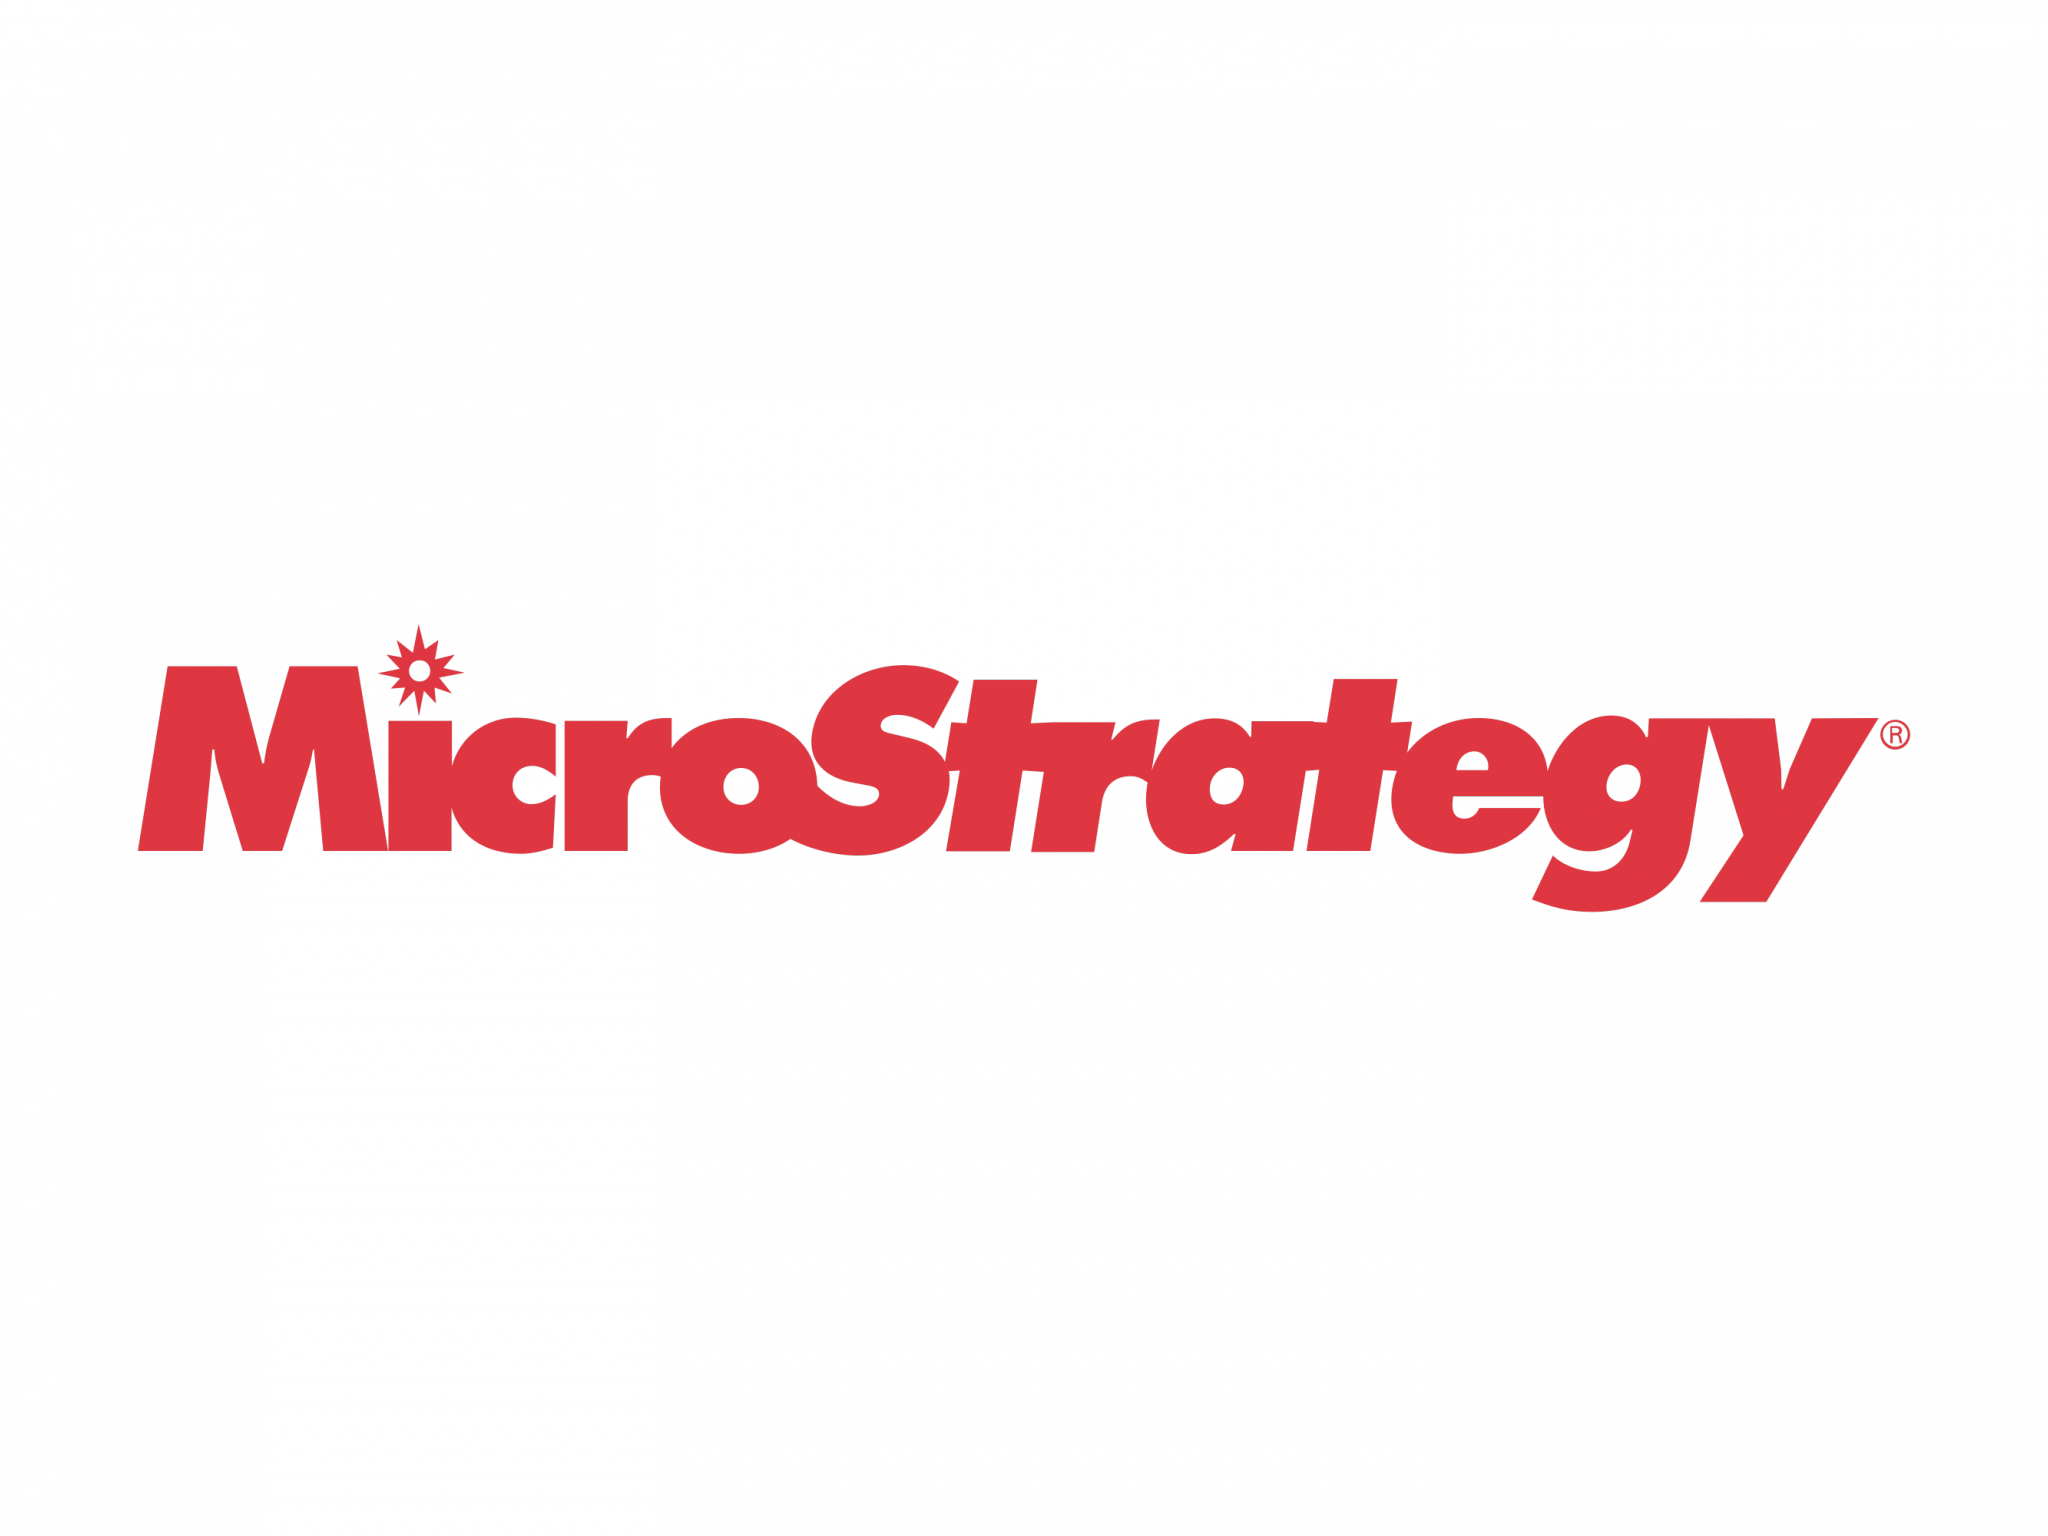  microstrategy-on-the-hunt-for-a-bitcoin-lightning-network-engineer 